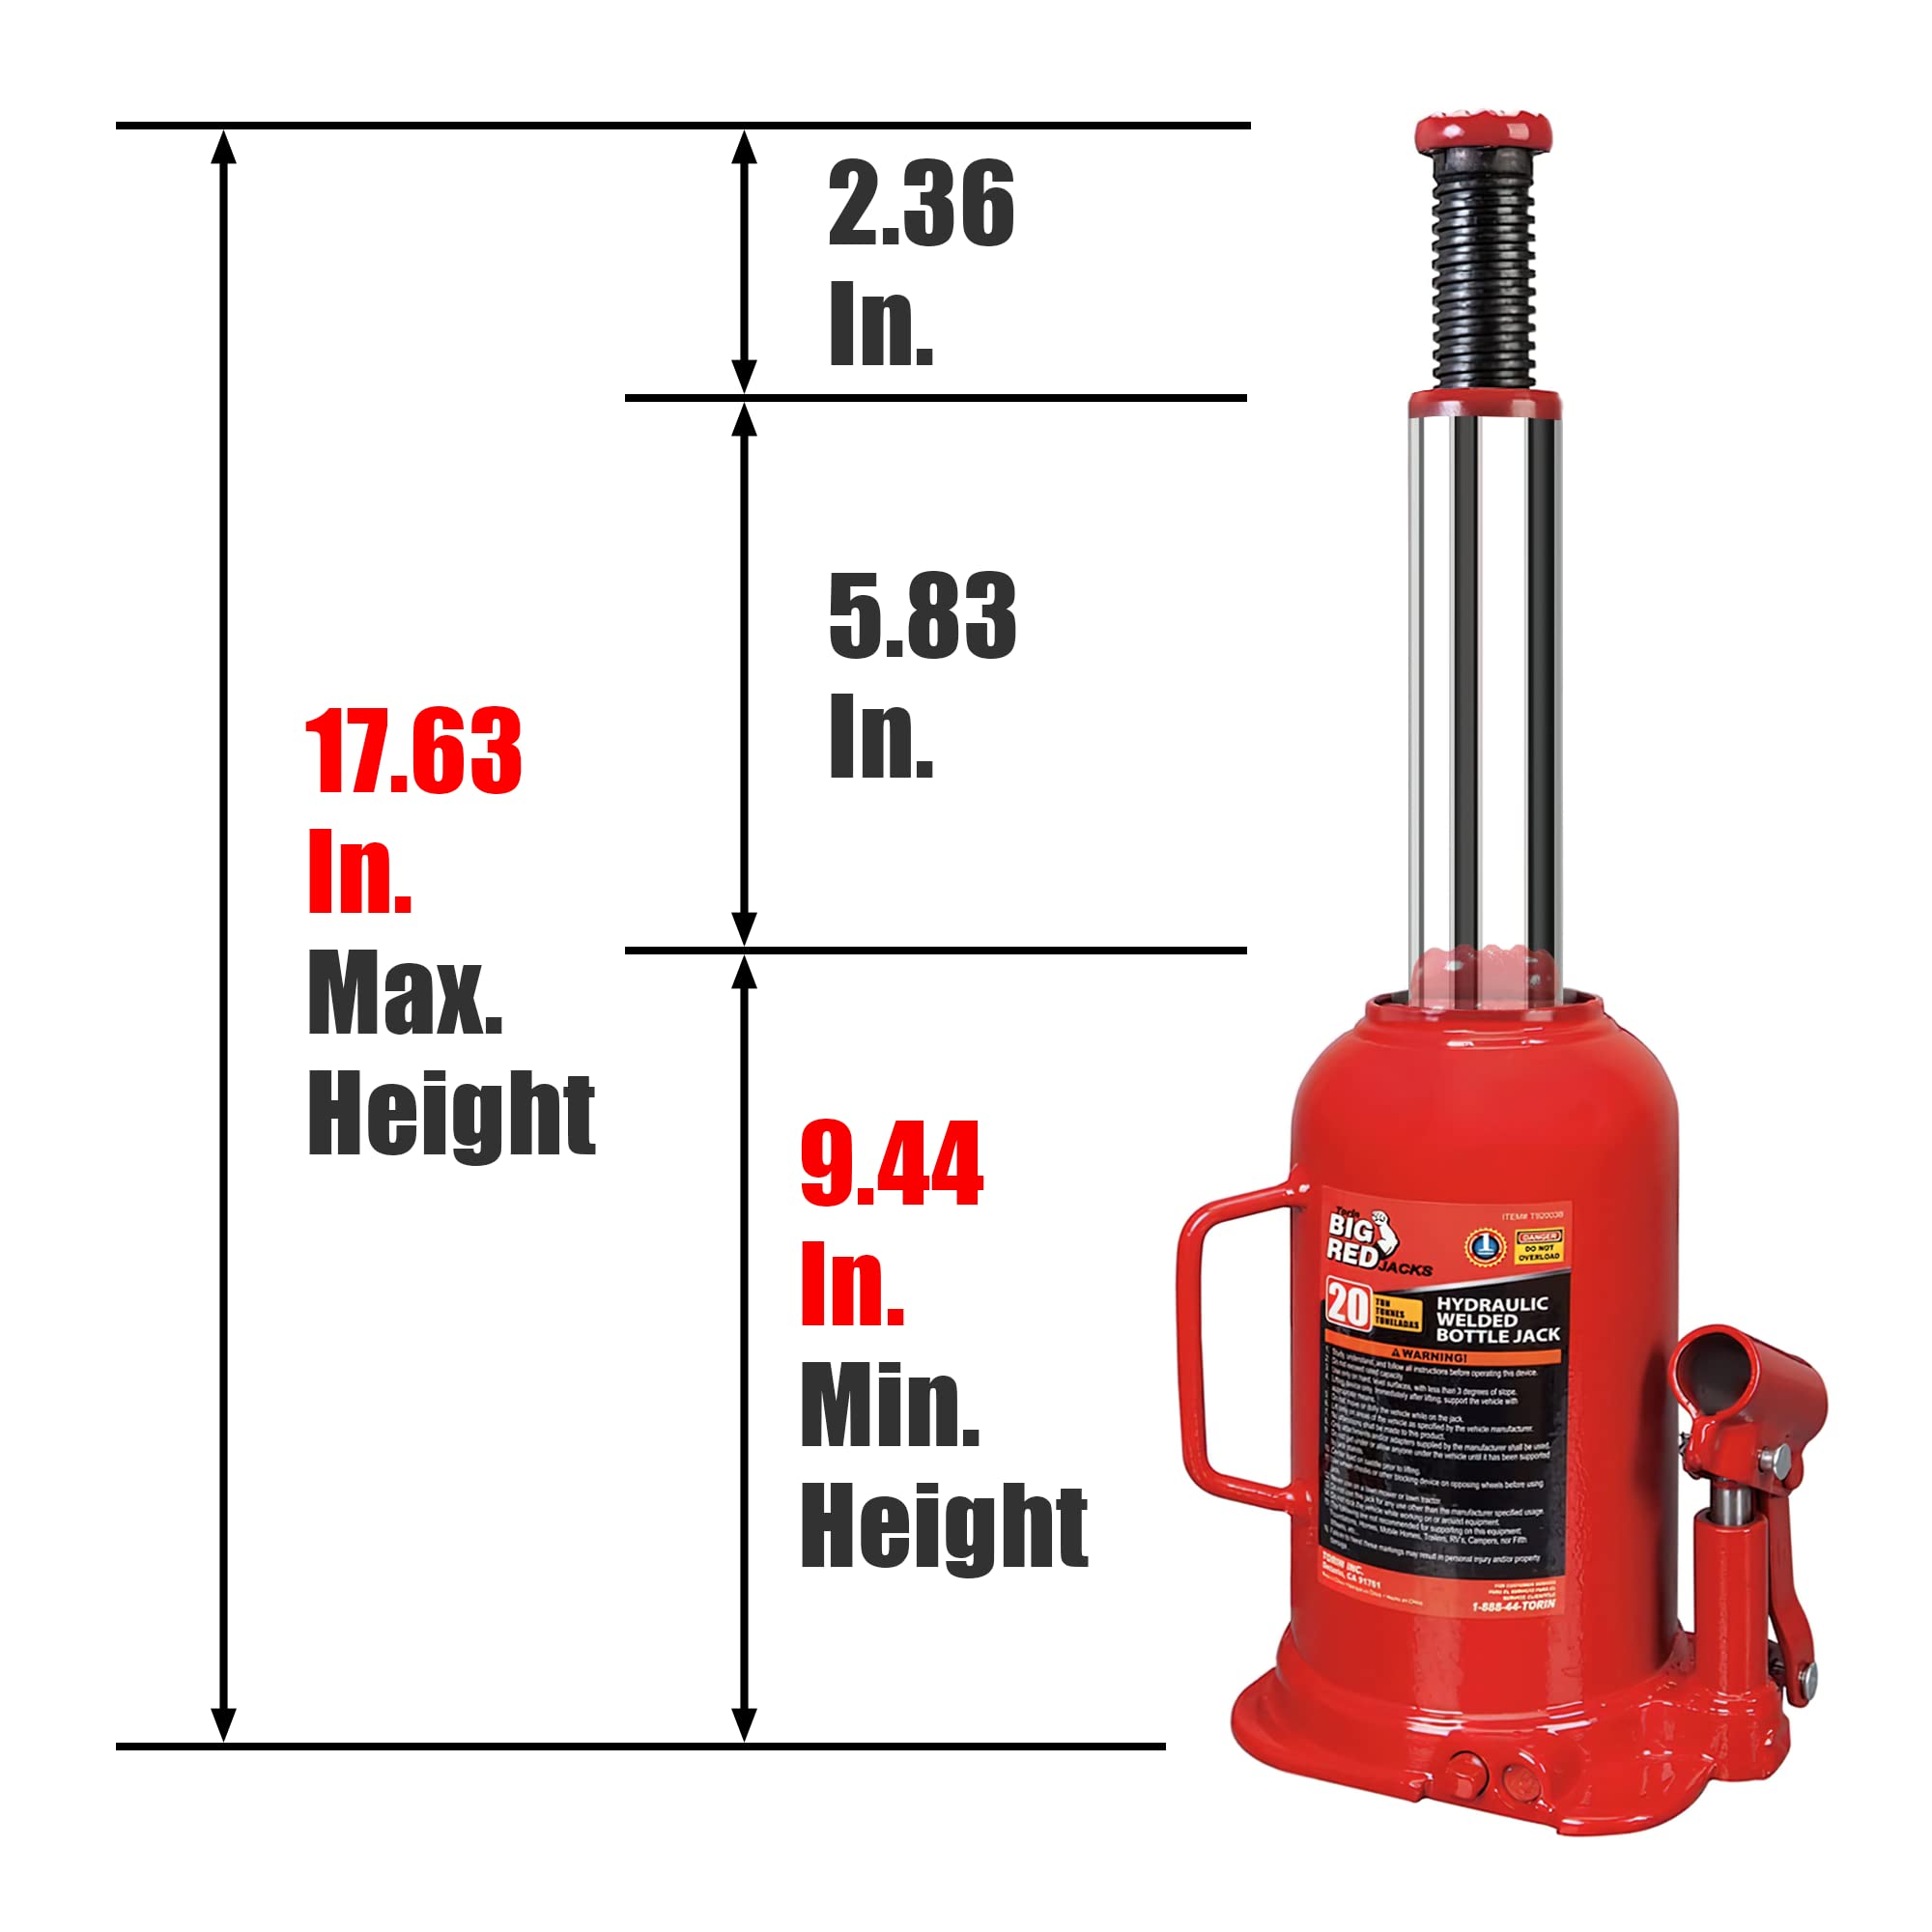 BIG RED 20 Ton (40,000 LBs) Torin Welded Hydraulic Car Bottle Jack for Auto Repair and House Lift, Red, TAM92003B